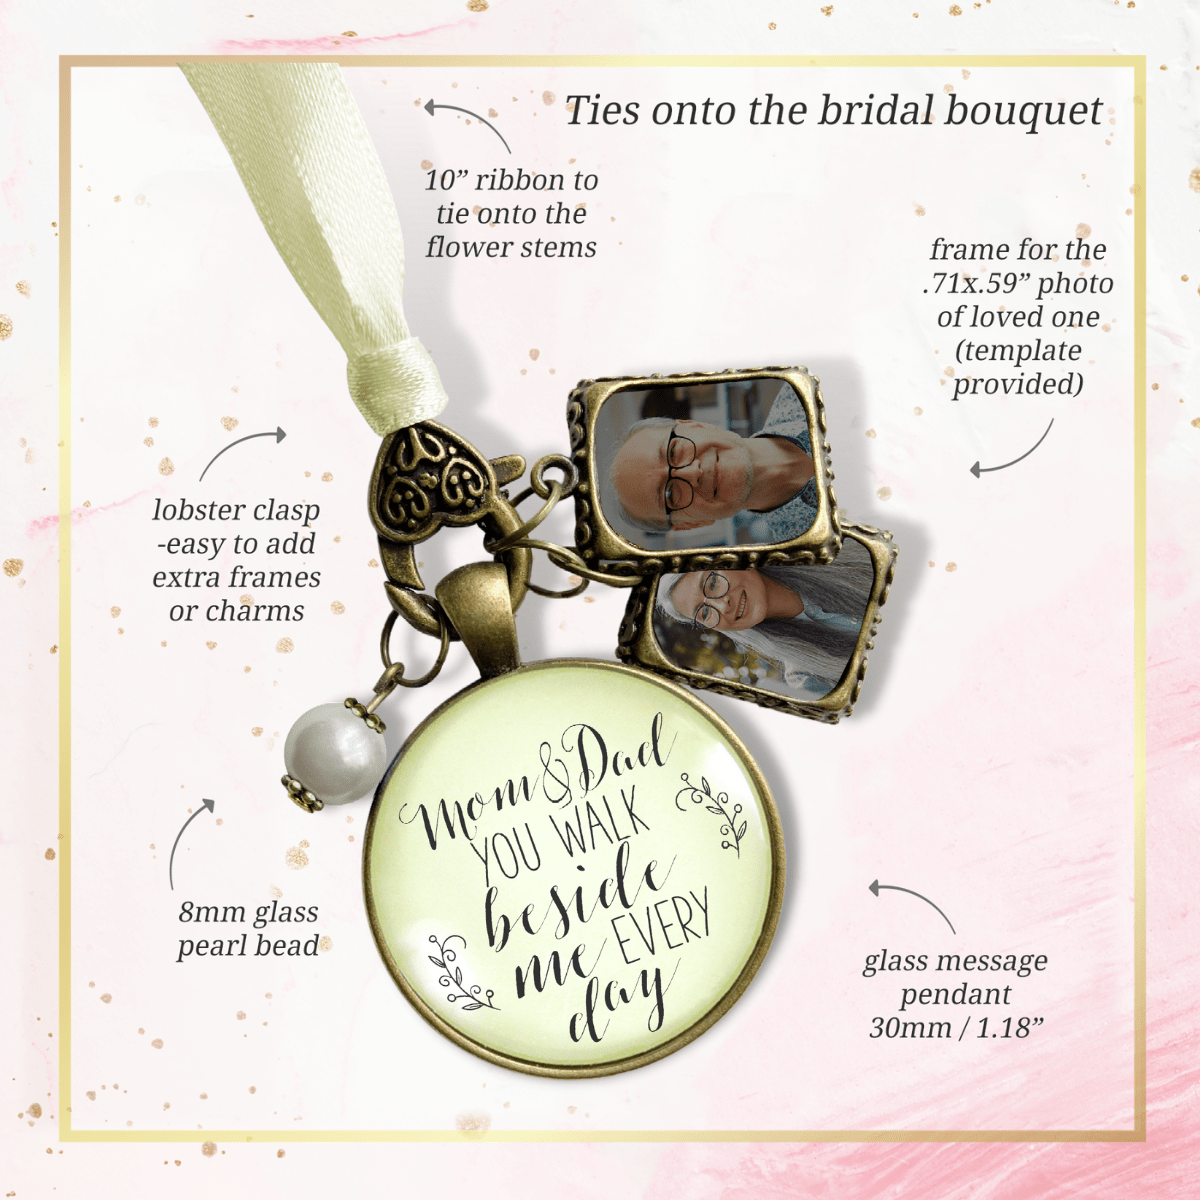 Bouquet Charm Mom Dad Remembrance Parents Memory White Wedding Jewelry 2 Photo Frames - Gutsy Goodness Handmade Jewelry Gifts